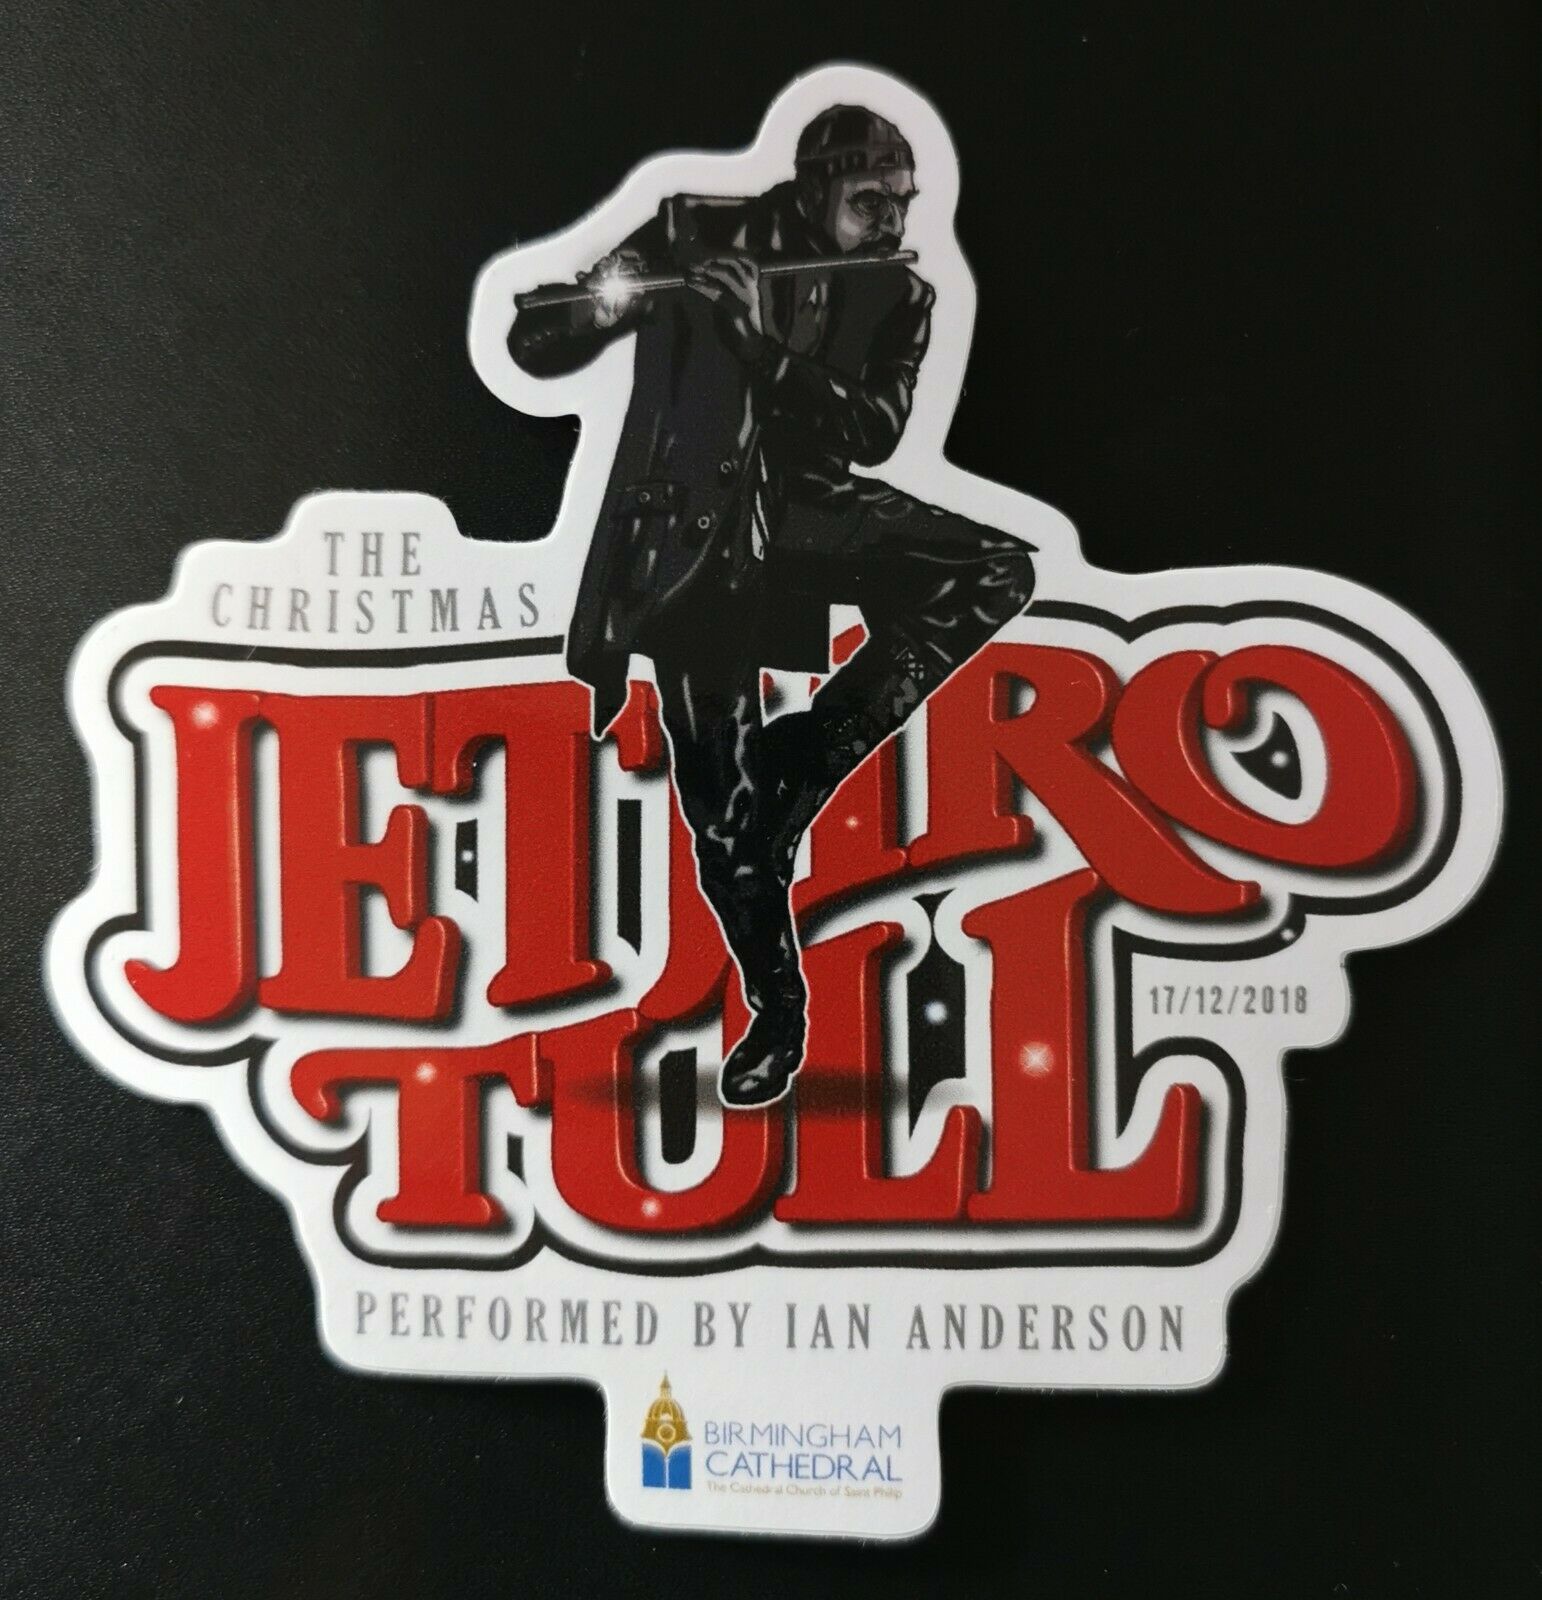 Jethro Tull - Birmingham Cathedral Christmas Concert Official Sticker